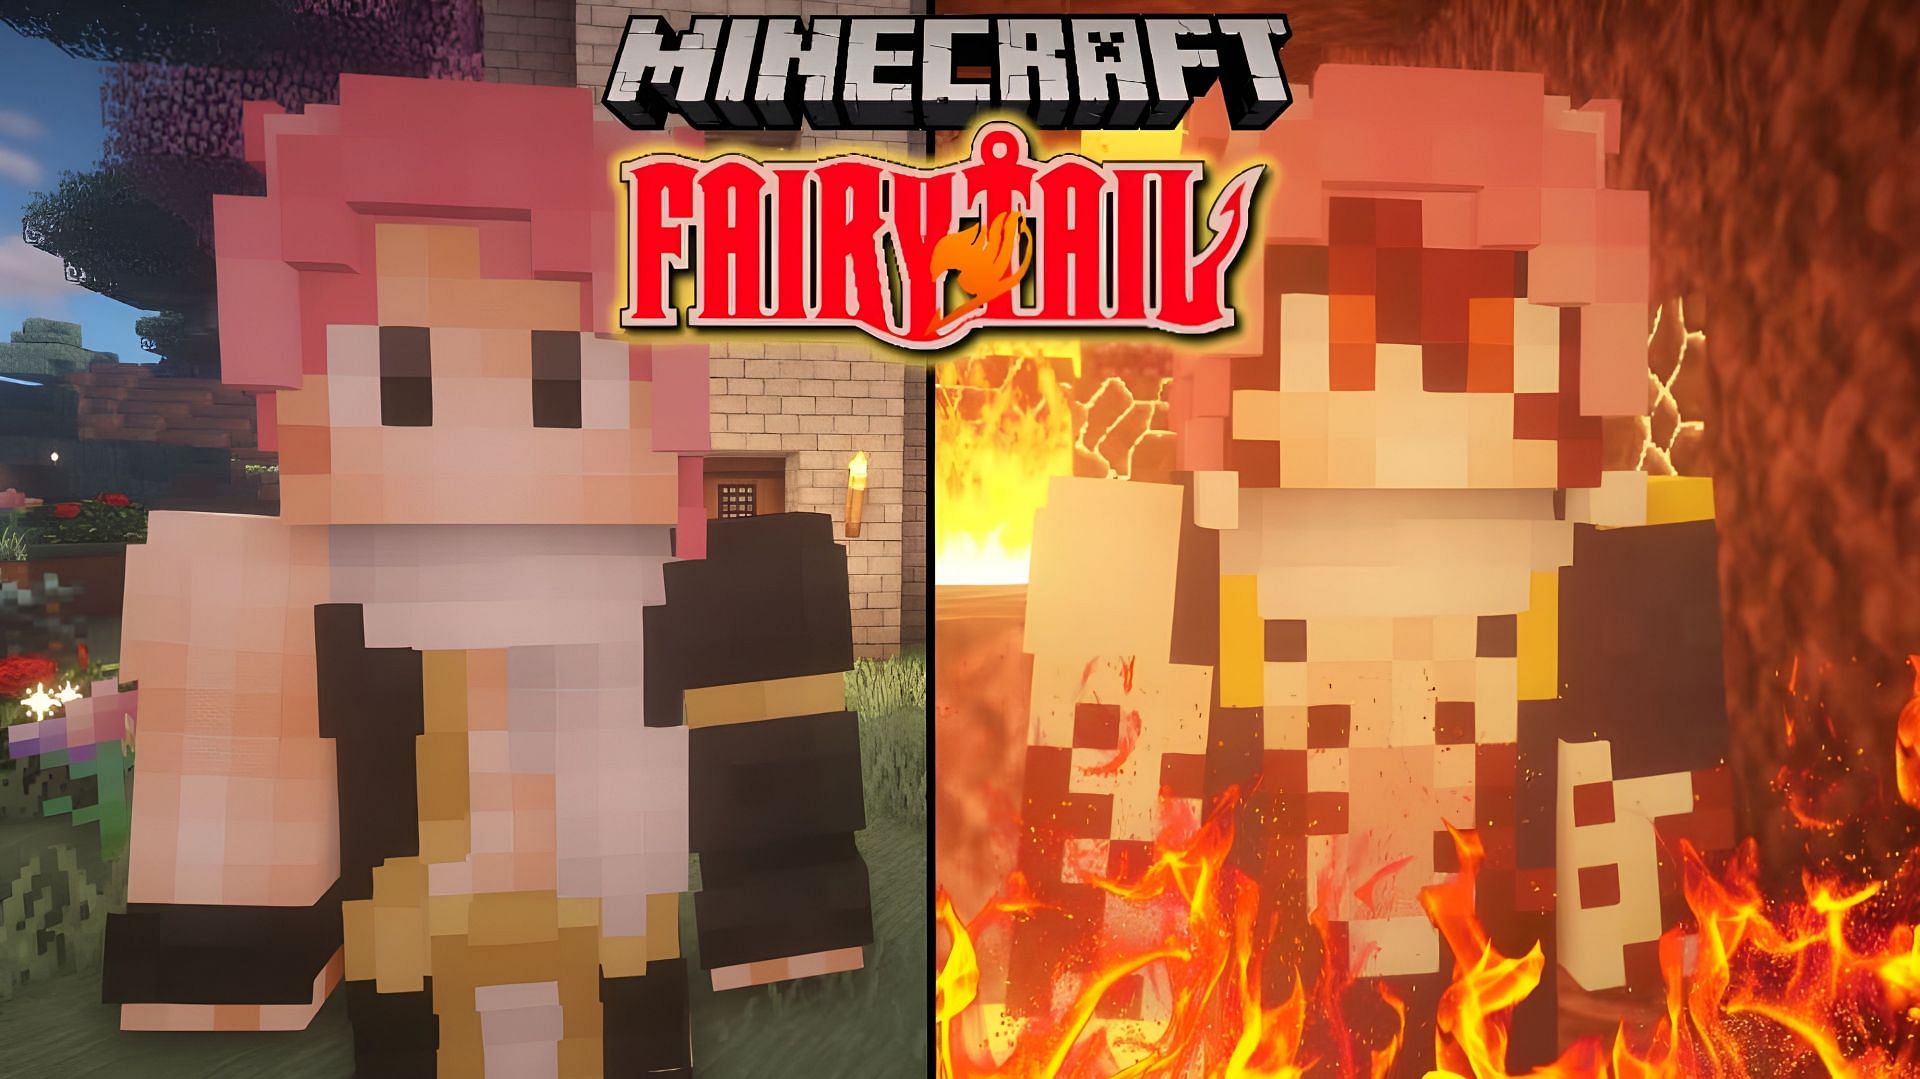 Fairy Tail servers are fun for those who want to experience Fairy Tail in Minecraft (Image via Youtube/Orange Prince)